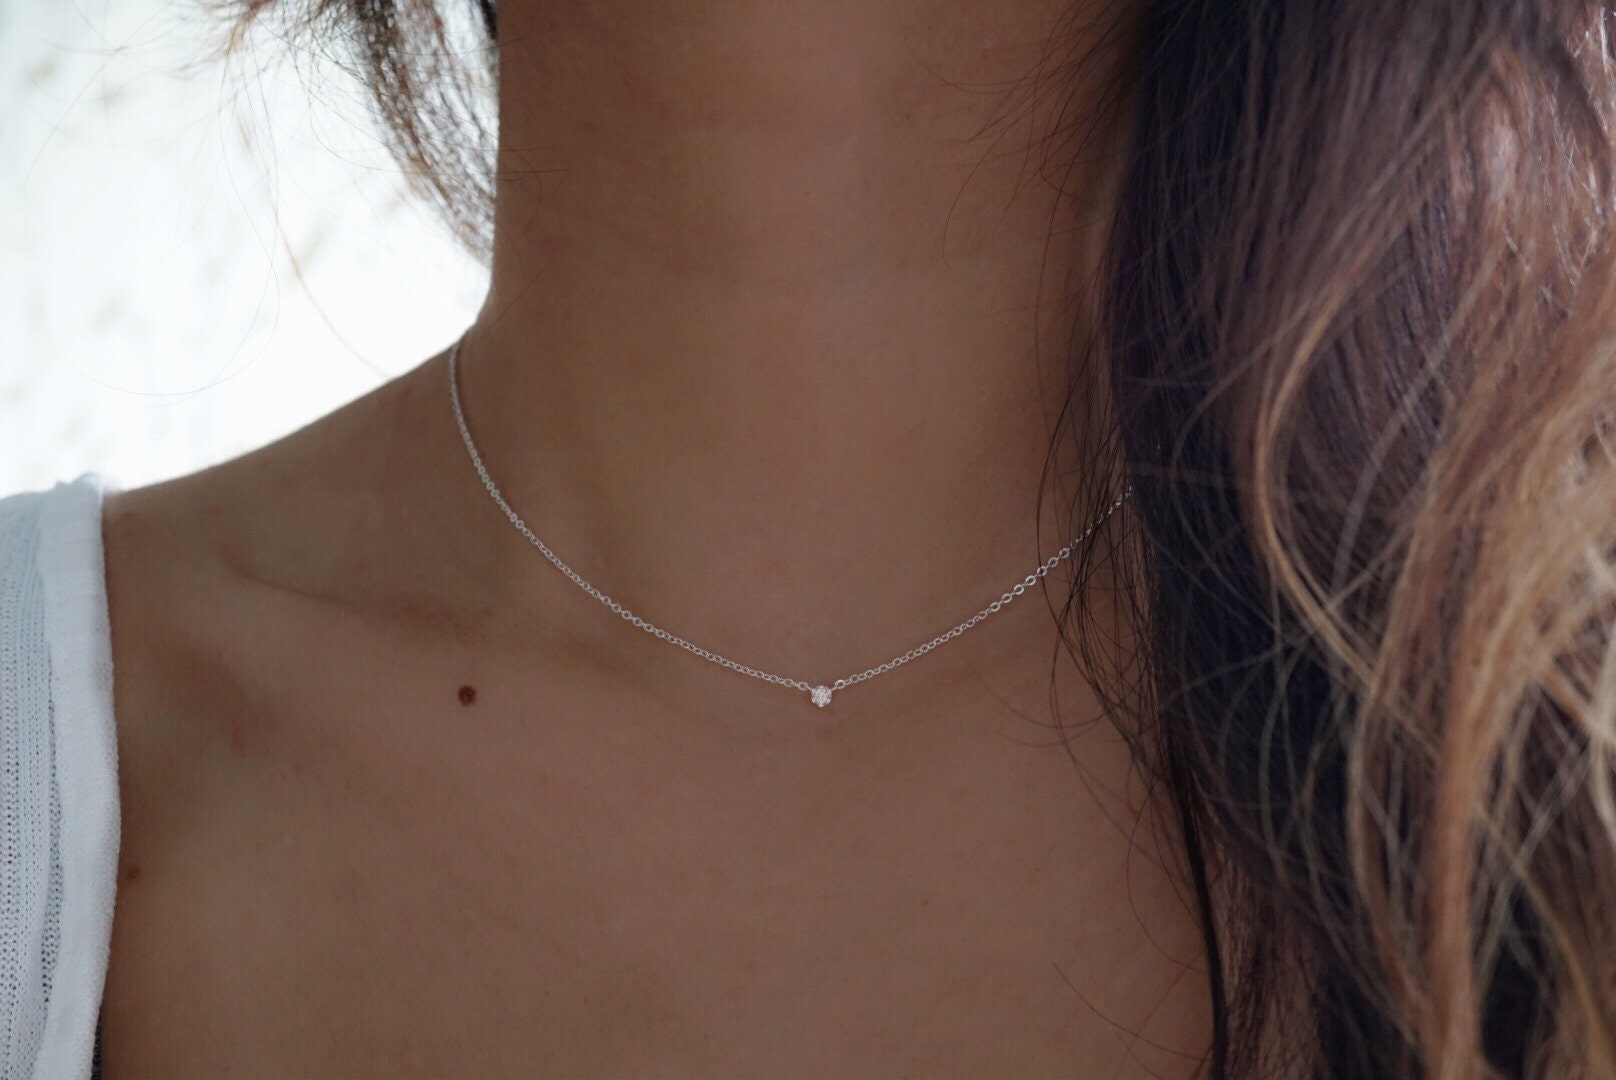 Buy Sterling Silver Coin Necklace, Simple Silver Necklace, Dainty Necklace  Silver, Tiny Silver Pendant Necklace, Silver Medallion Necklace, Disc  Online in India - Etsy